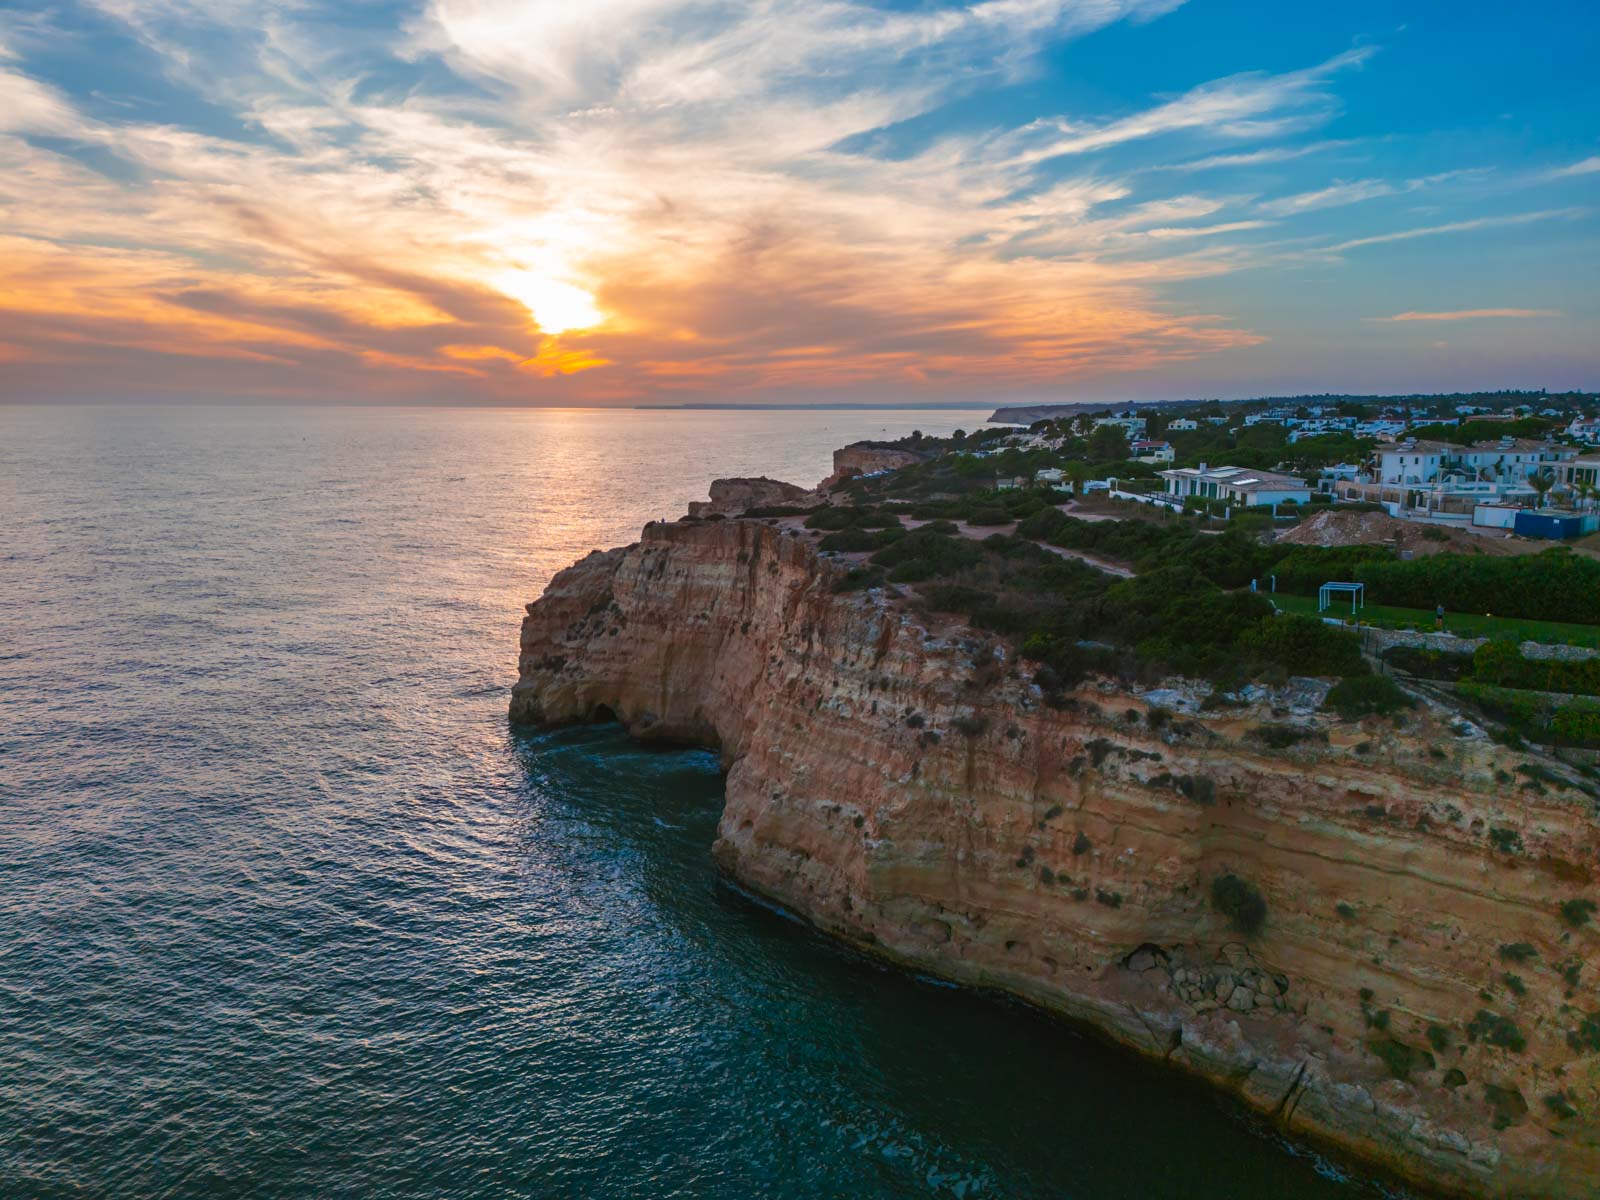 How to get to the Algarve Portugal